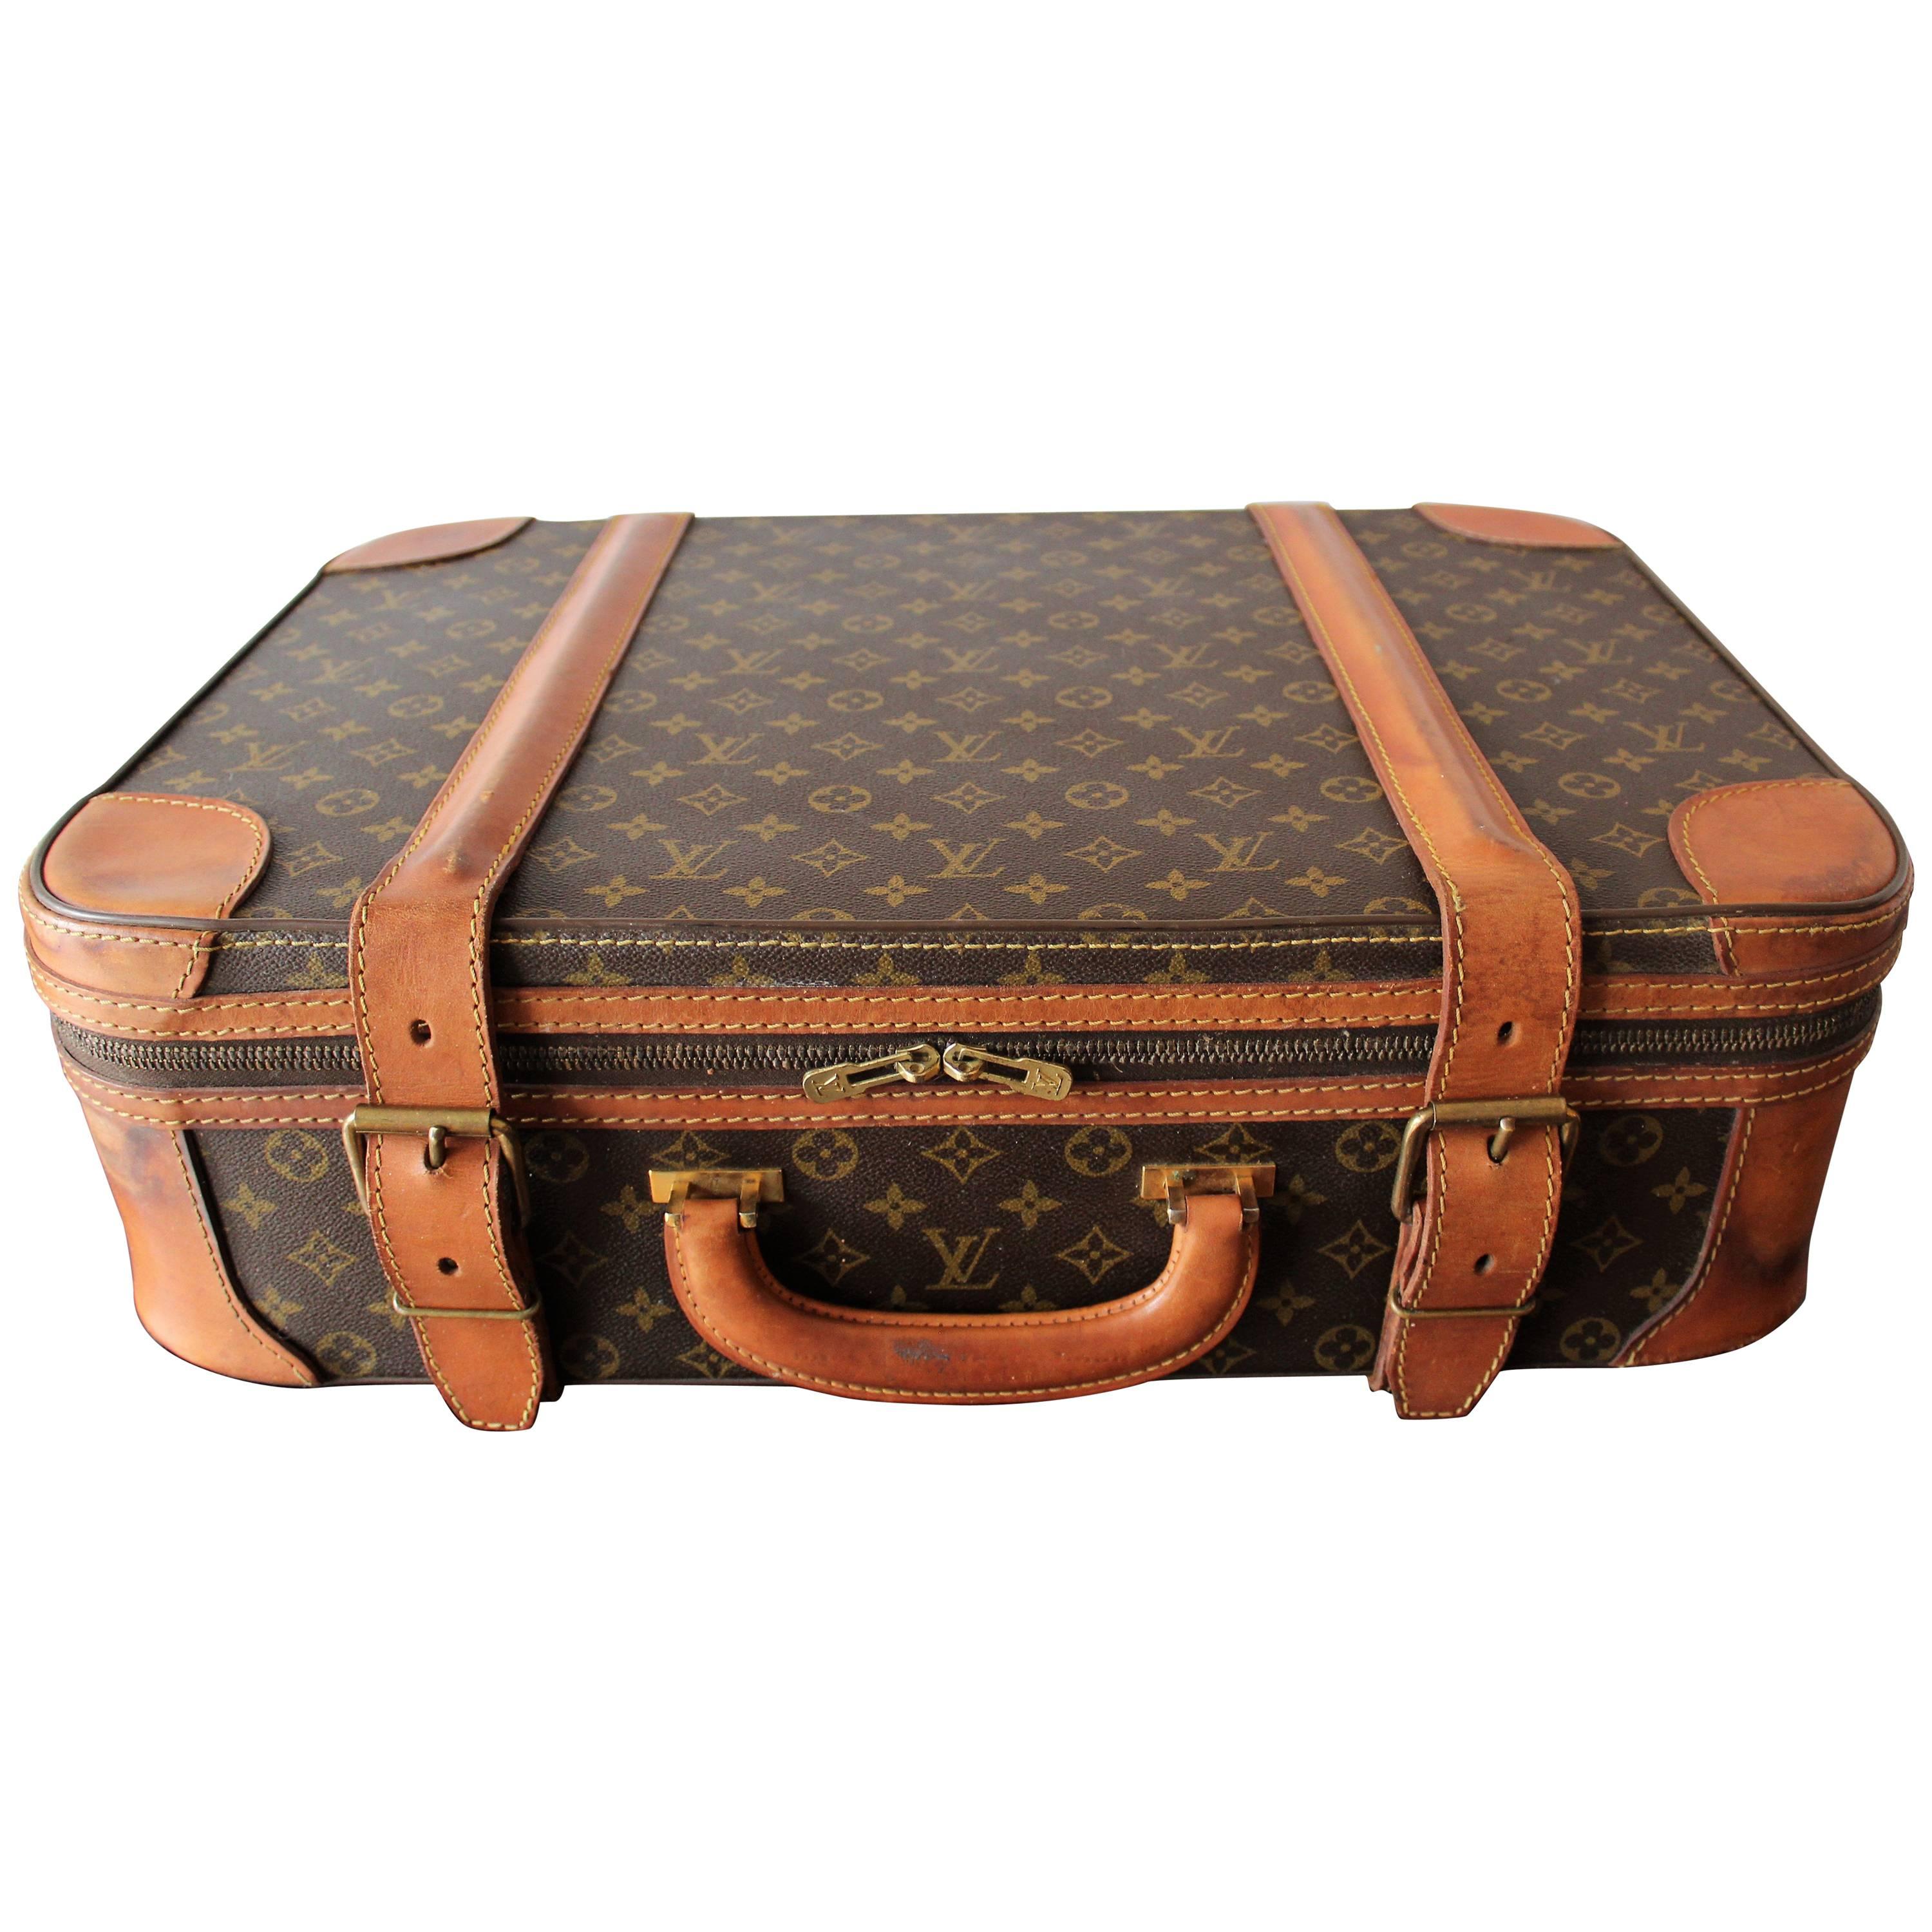 1970s Louis Vuitton Monogram Holdall Luggage Bag or Suitcase